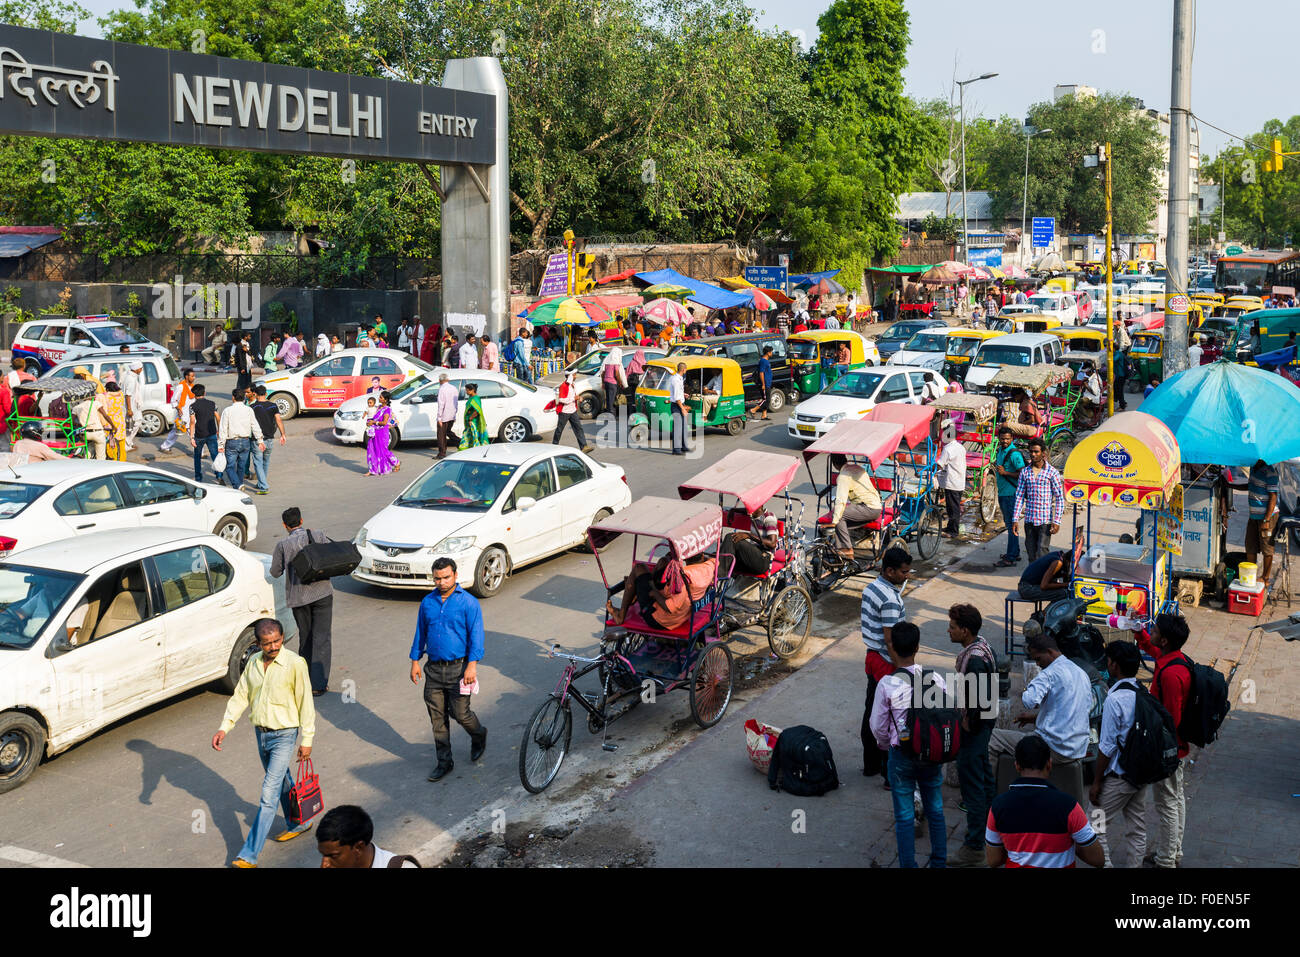 Cars, busses and cycle rickshaws are cought in the traffic jam in front of New Delhi Railway Station, New Delhi, Delhi, India Stock Photo